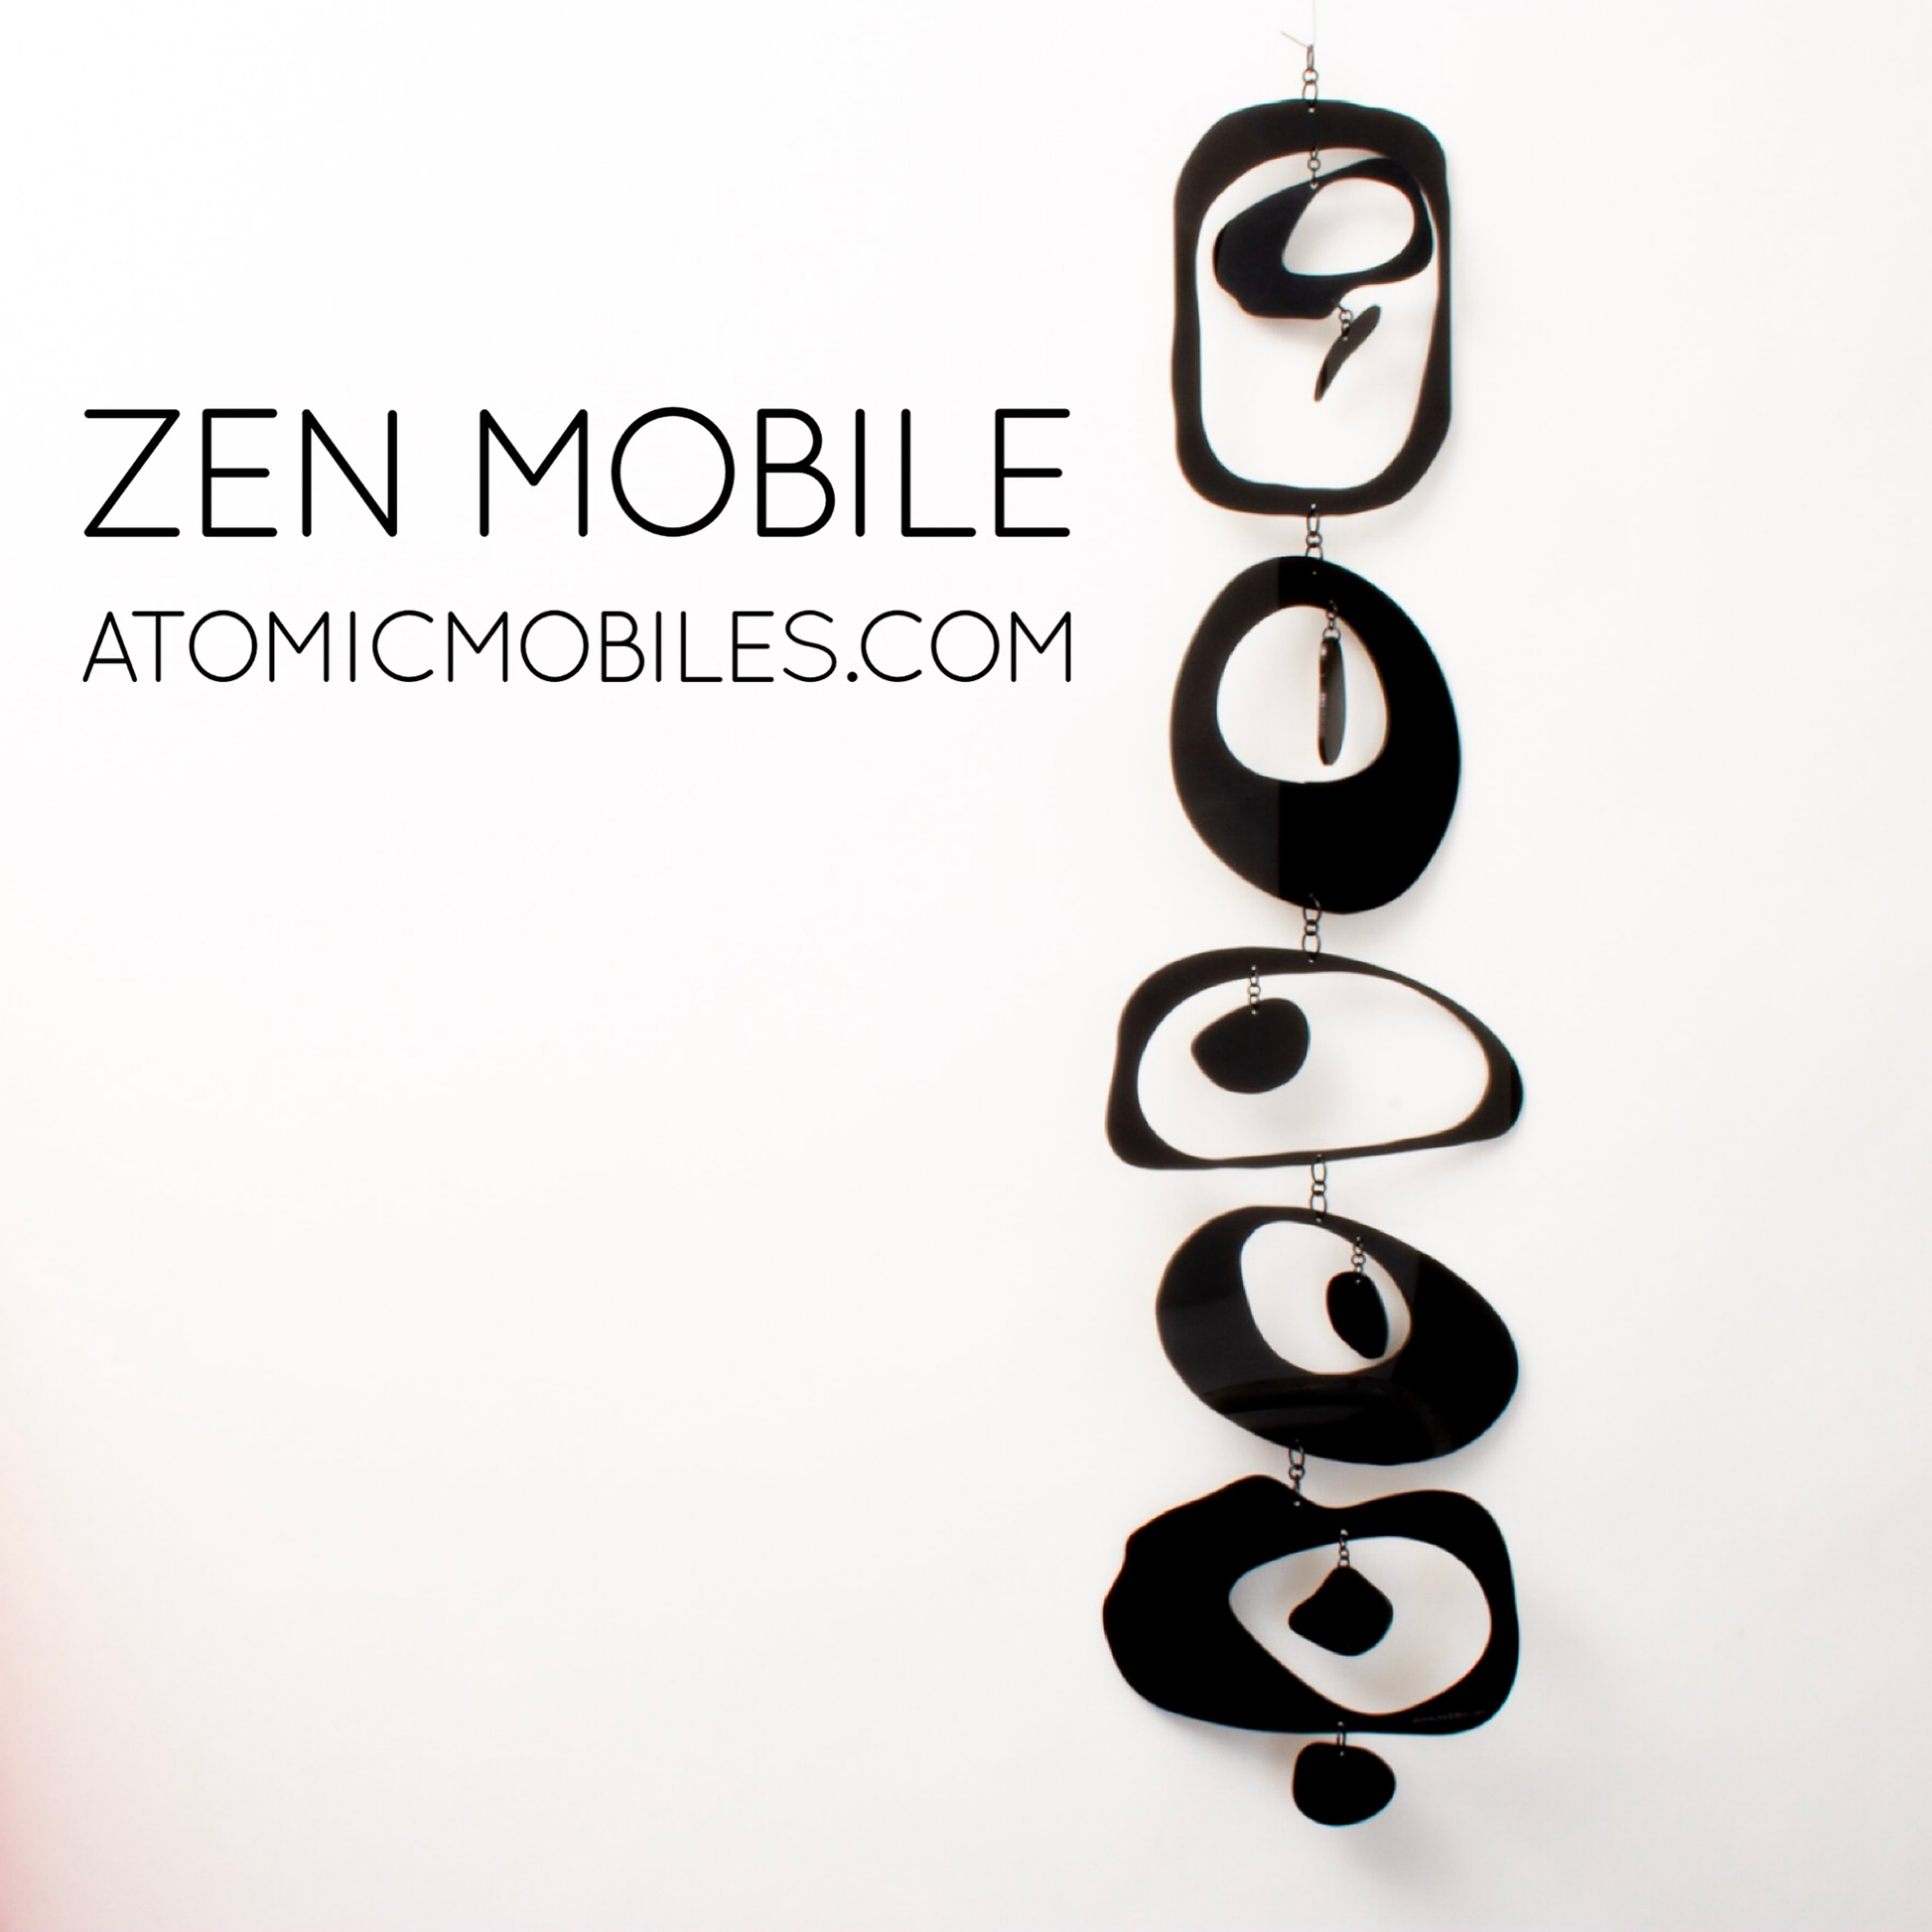 Zen Mobile in Black by AtomicMobiles.com on white background - calm kinetic sculpture inspired by rock balancing